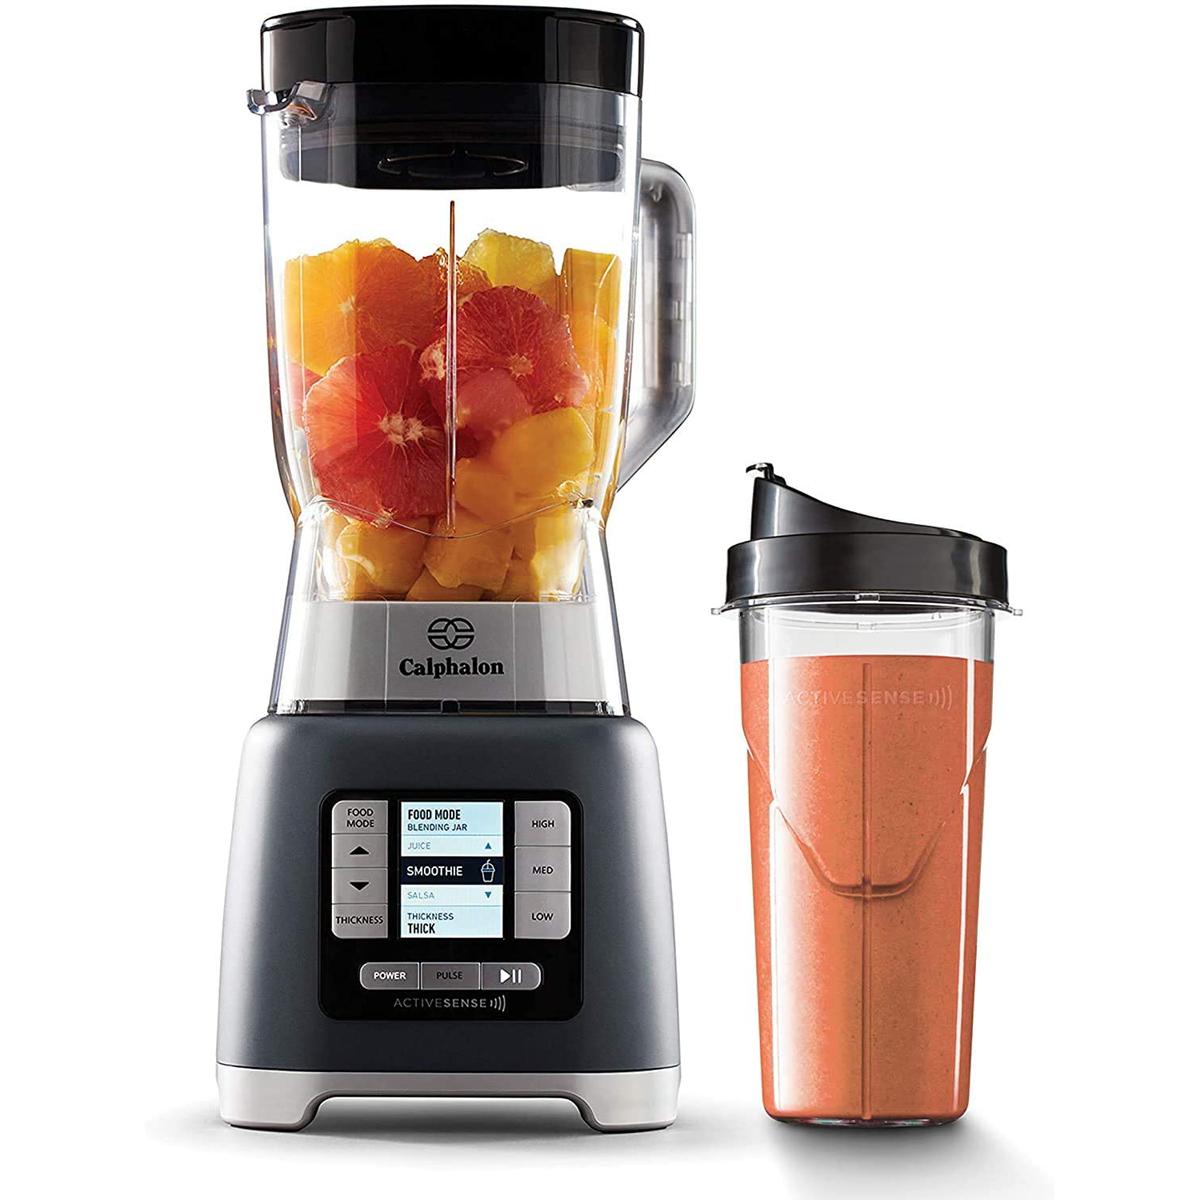 Calphalon Activesense Blender with Blend-N-Go Cup for $117.99 Shipped